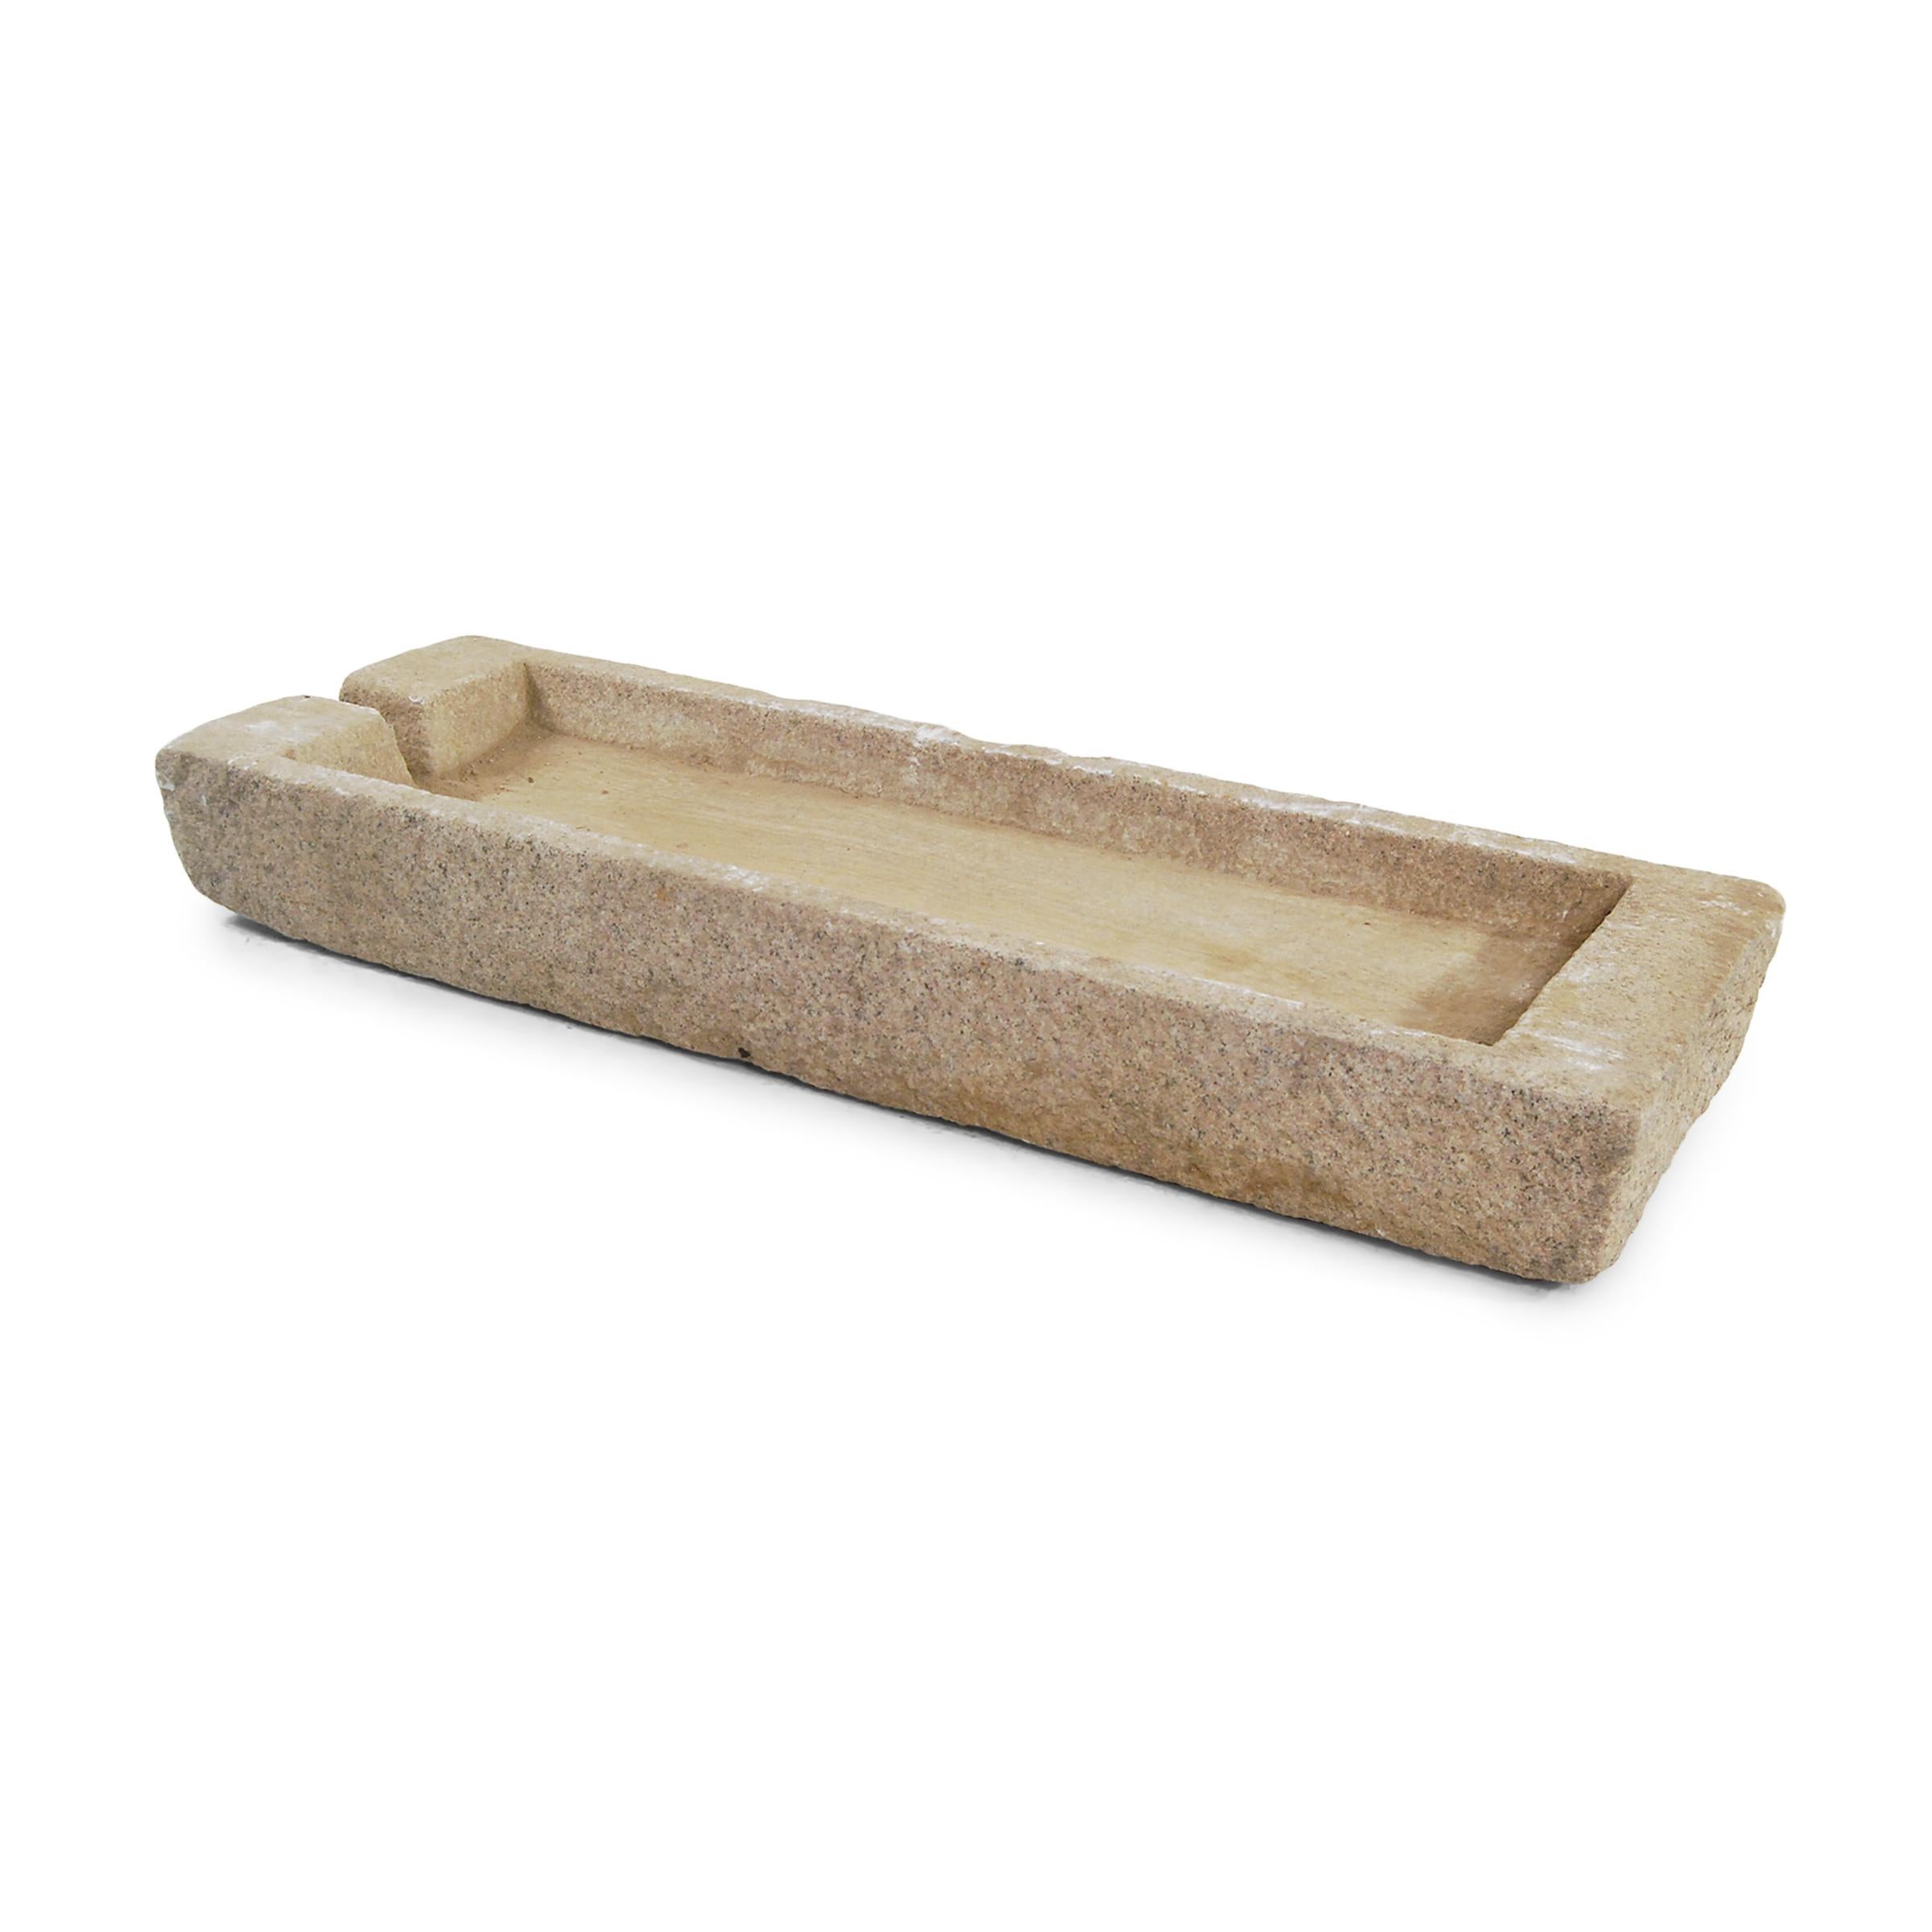 Prized mounts once took refreshment from this stone trough, carved from a solid block of limestone more than hundred years ago. Once purely functional, the trough is celebrated today for its elegant, simple form and rustic authenticity. A wonderful